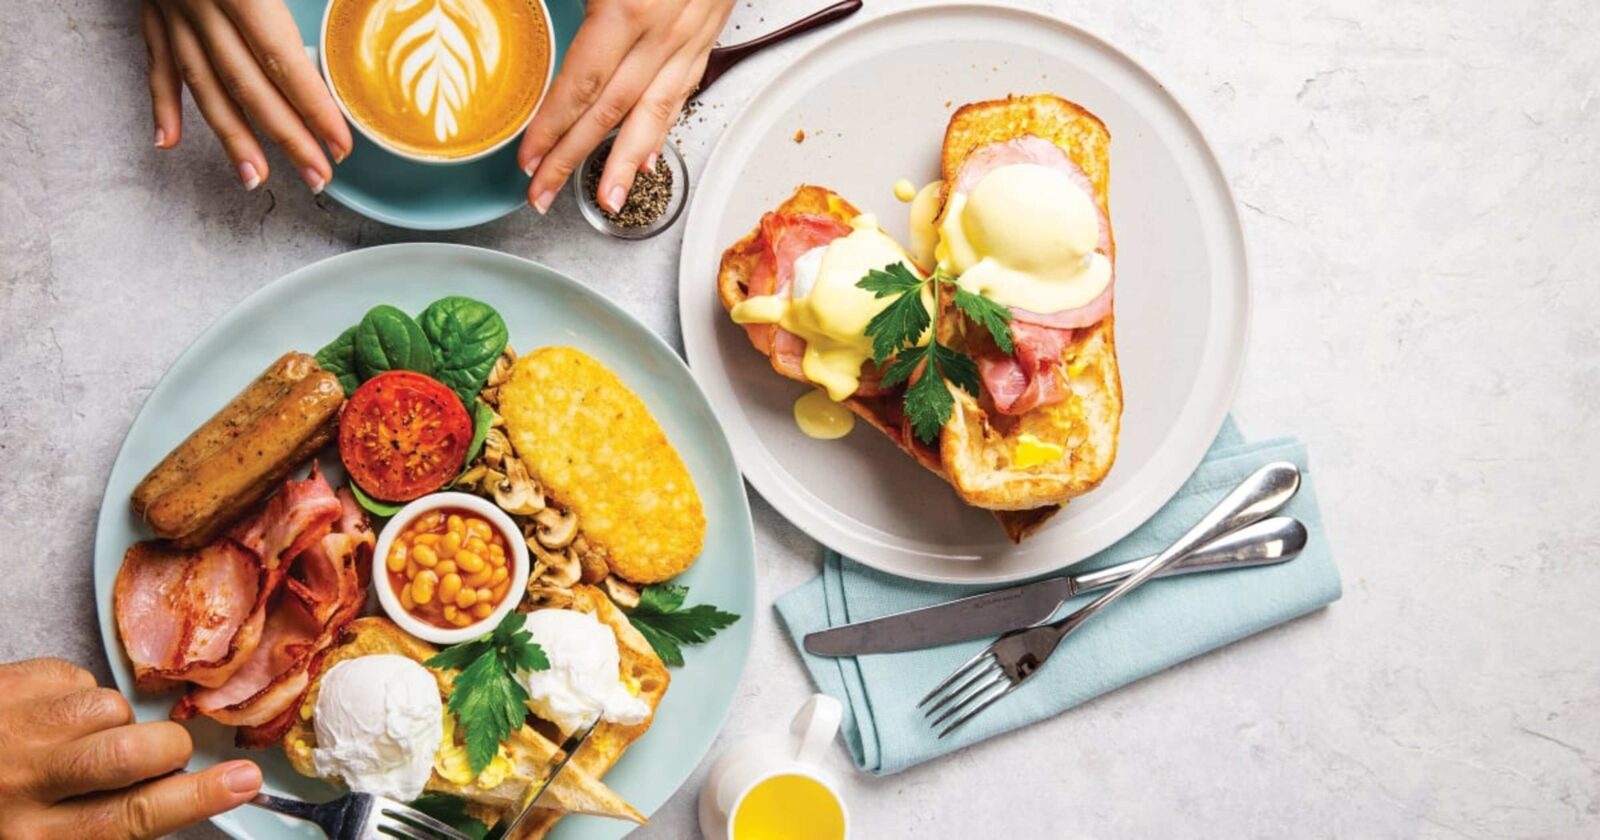 Savour a range of delicious breakfast options, available until 5pm